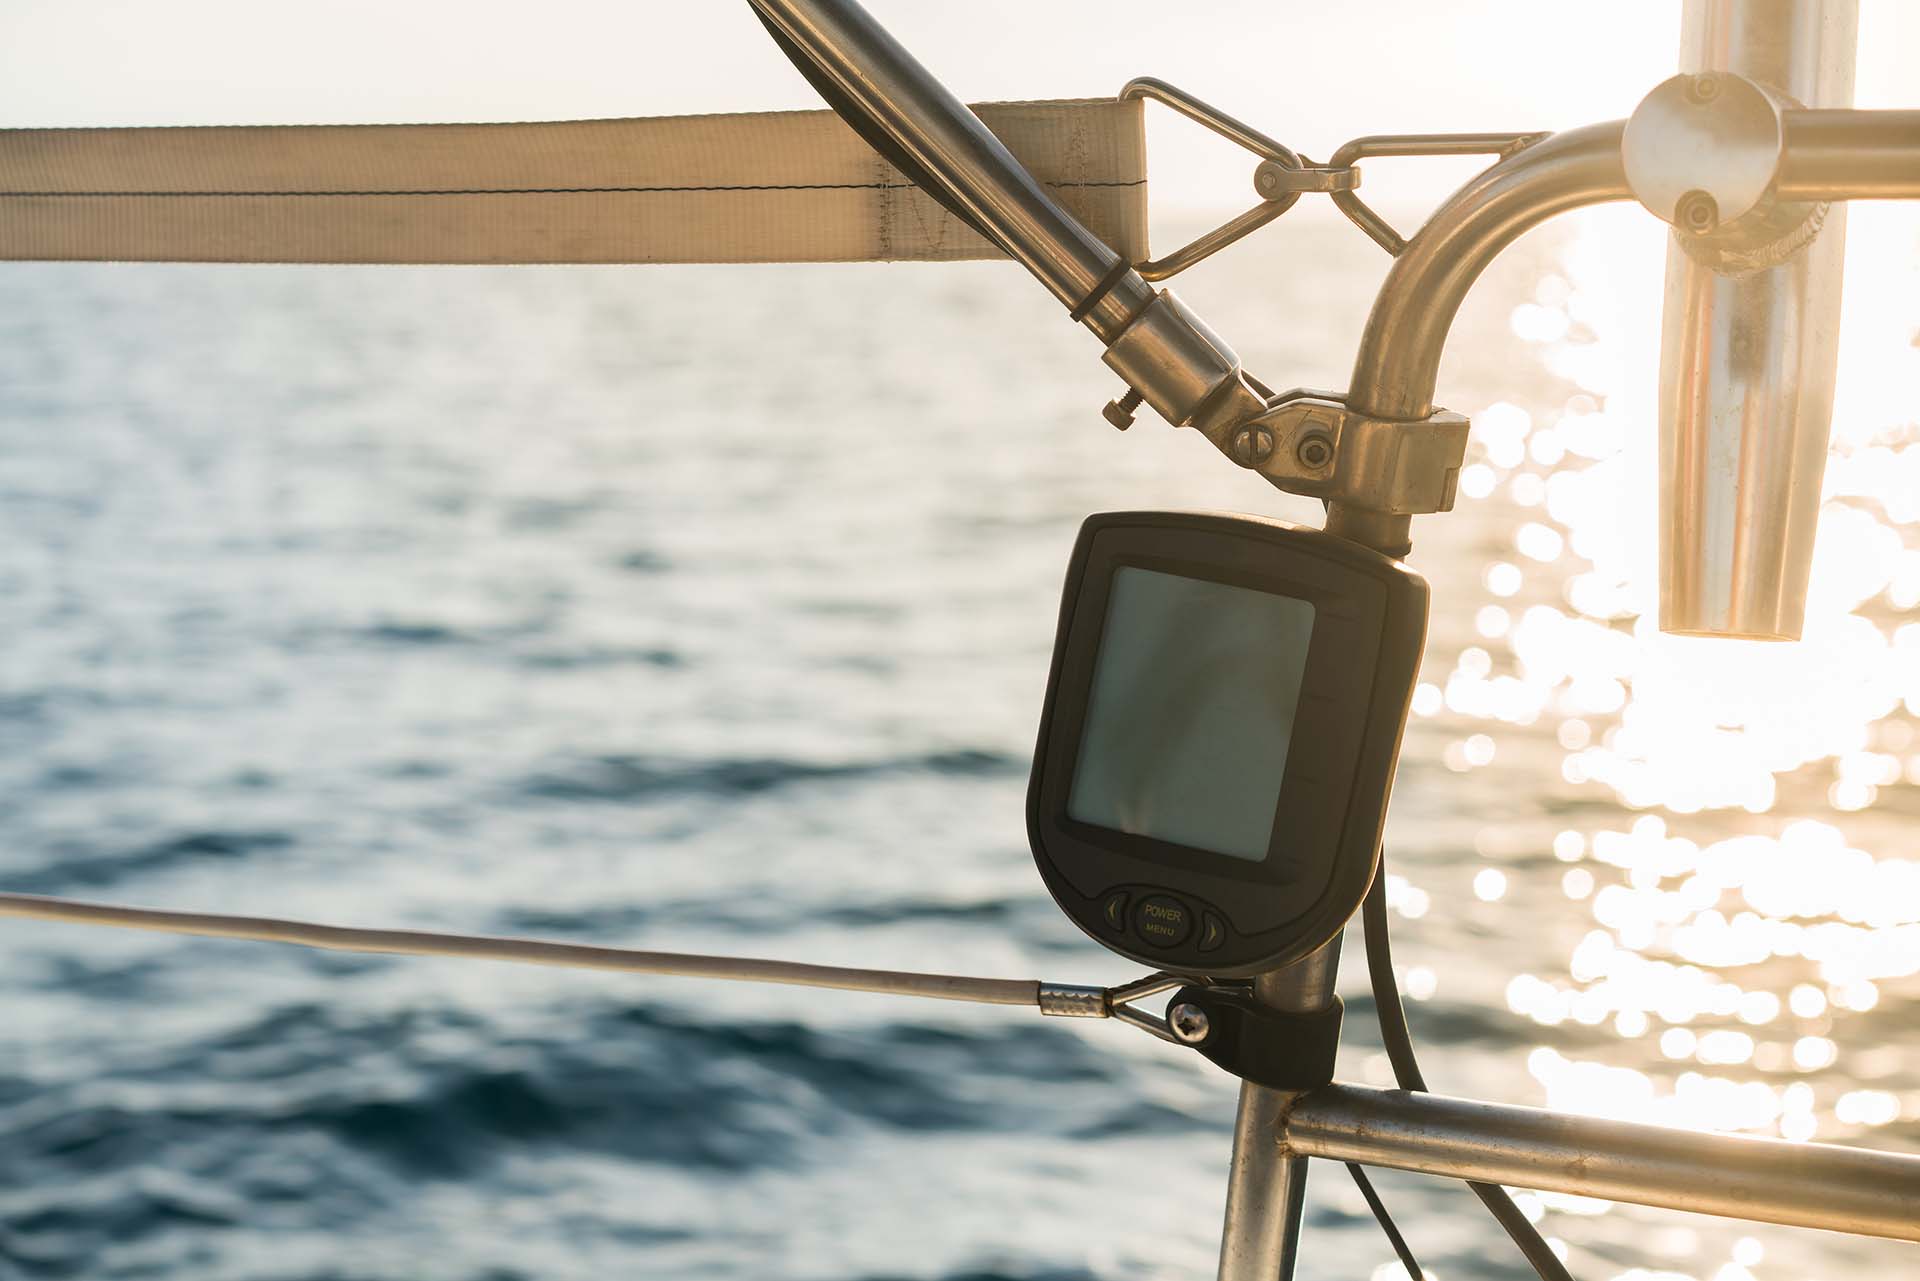 Fishfinder attached to a boat